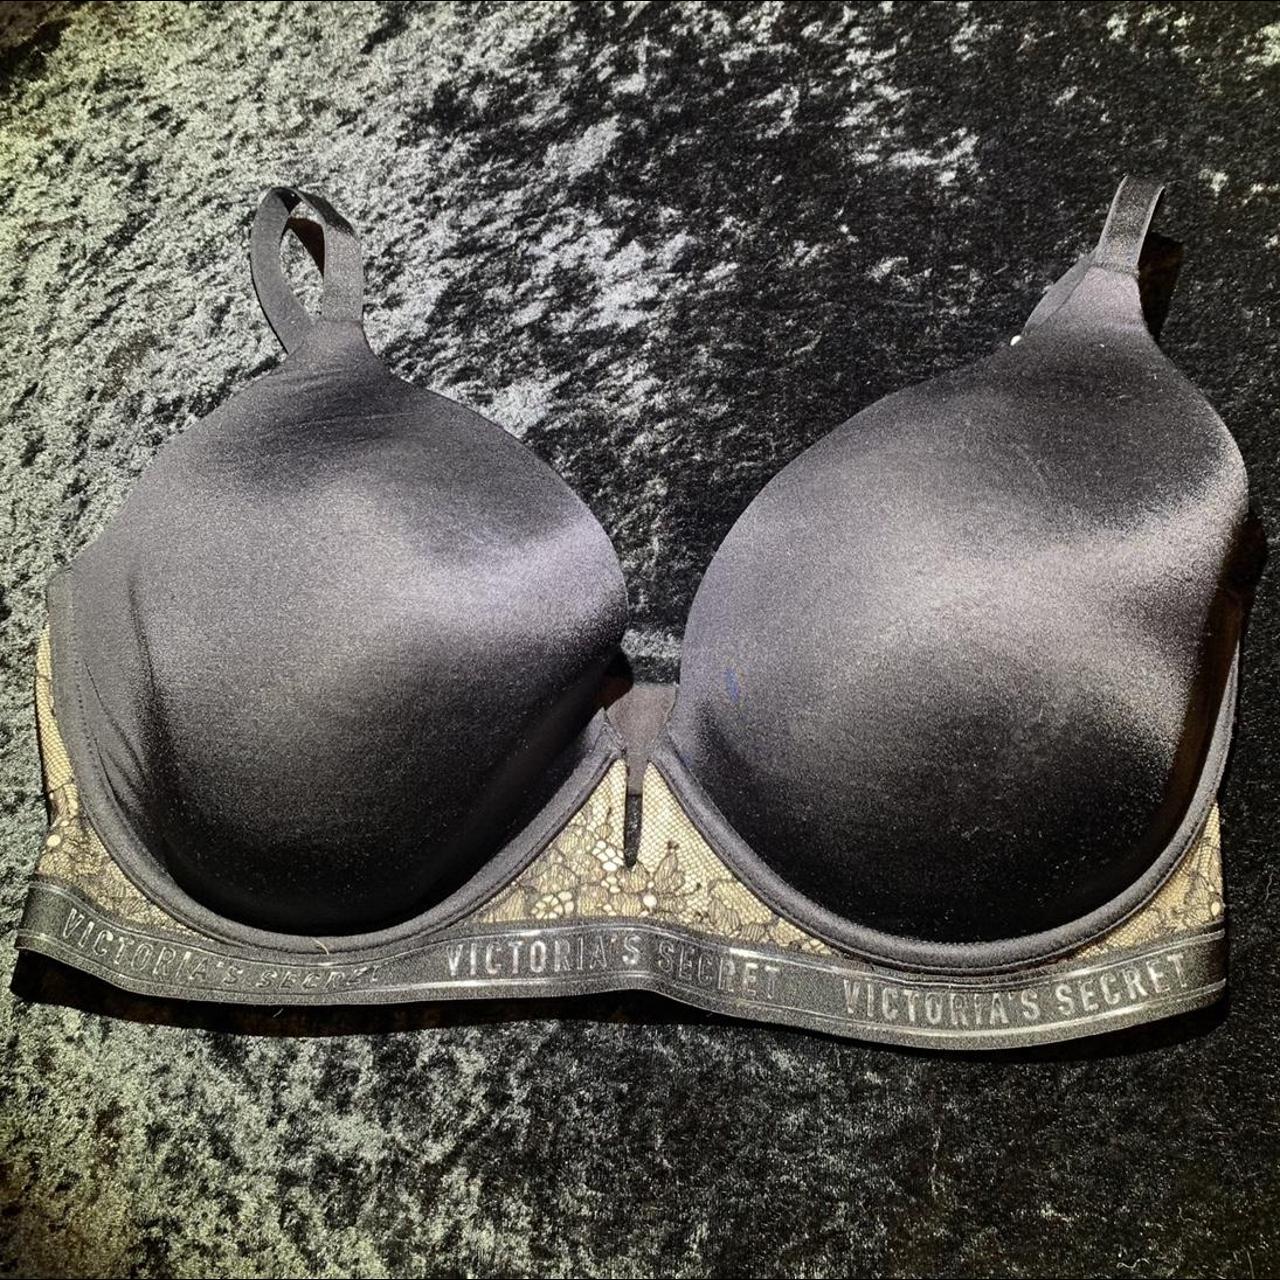 Padded Lace Bra In perfect condition. Size 36DDD/F80 - Depop